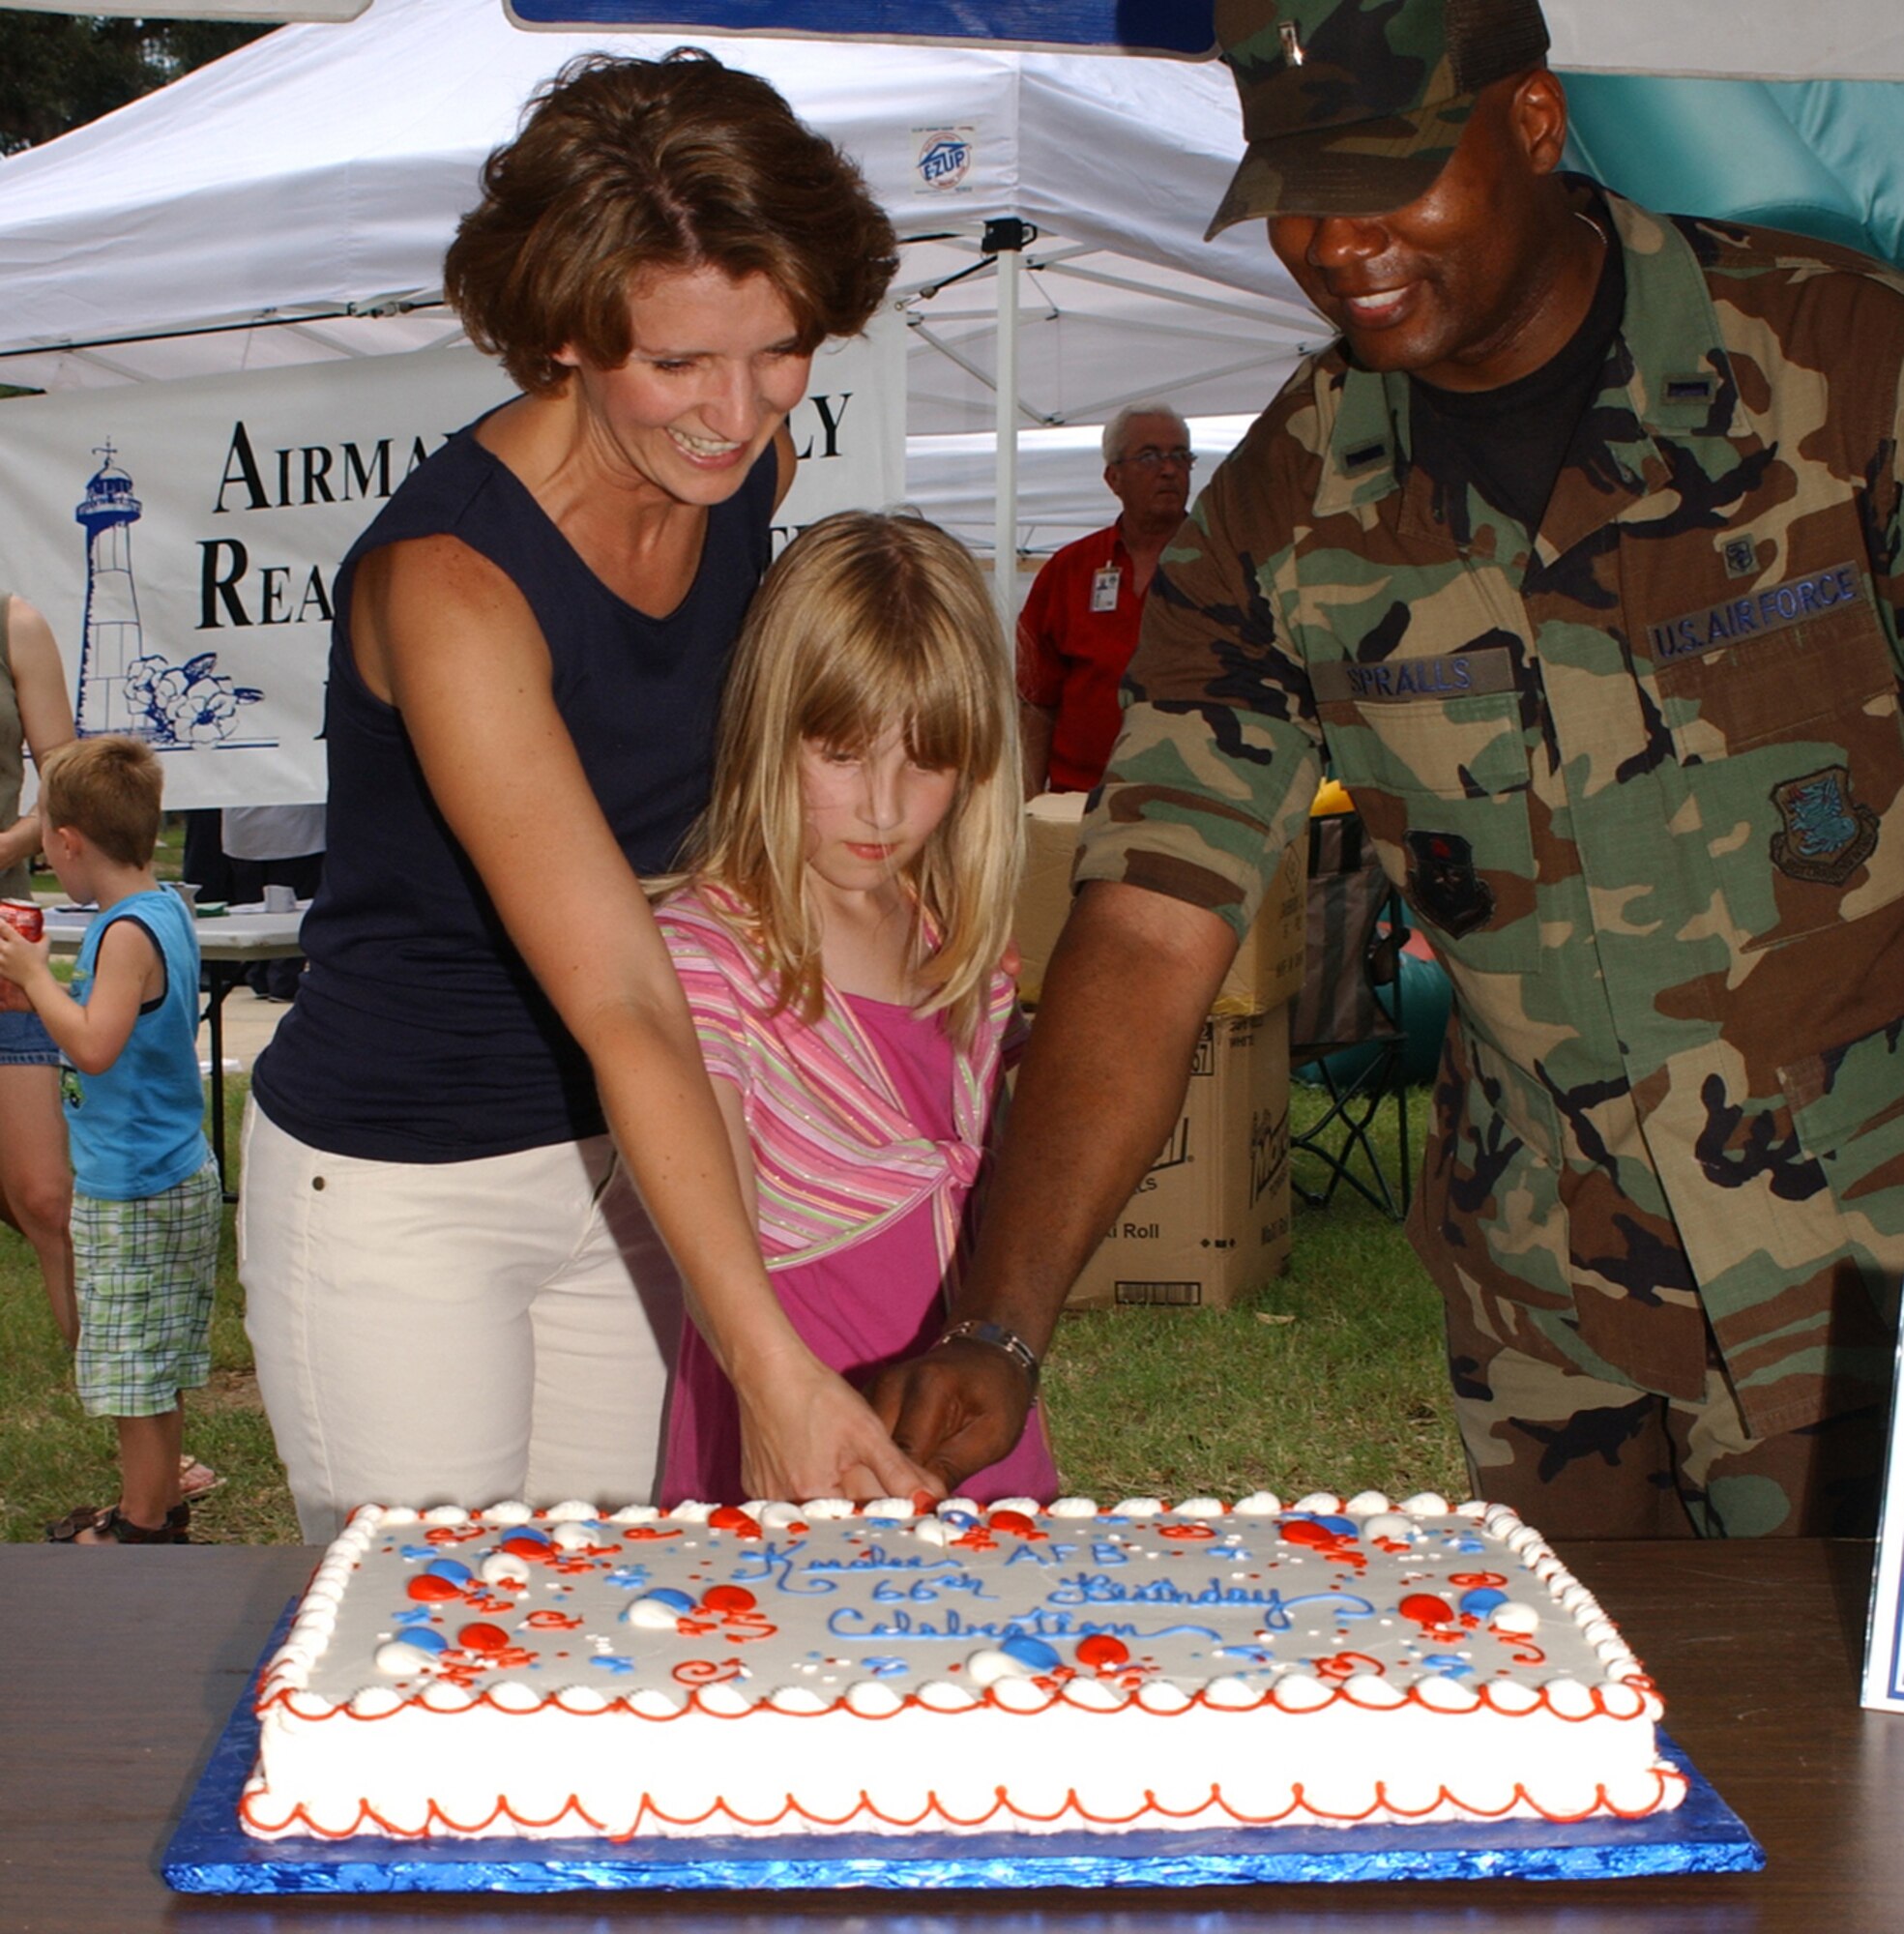 From left, Laura and 8-year-old Claire Capasso  join 1st Lt. Samuel Spralls in cutting the cake at Keesler’s 66th birthday picnic June 14 in marina park.  The Capassos are the wife and daughter of Brig. Gen. Paul Capasso, 81st Training Wing commander.  Lieutenant Spralls, 81st Medical Support Squadron, was project officer for the event, which was hosted by the company grade officers council.  (U. S. Air Froce photo by Kemberly Groue)